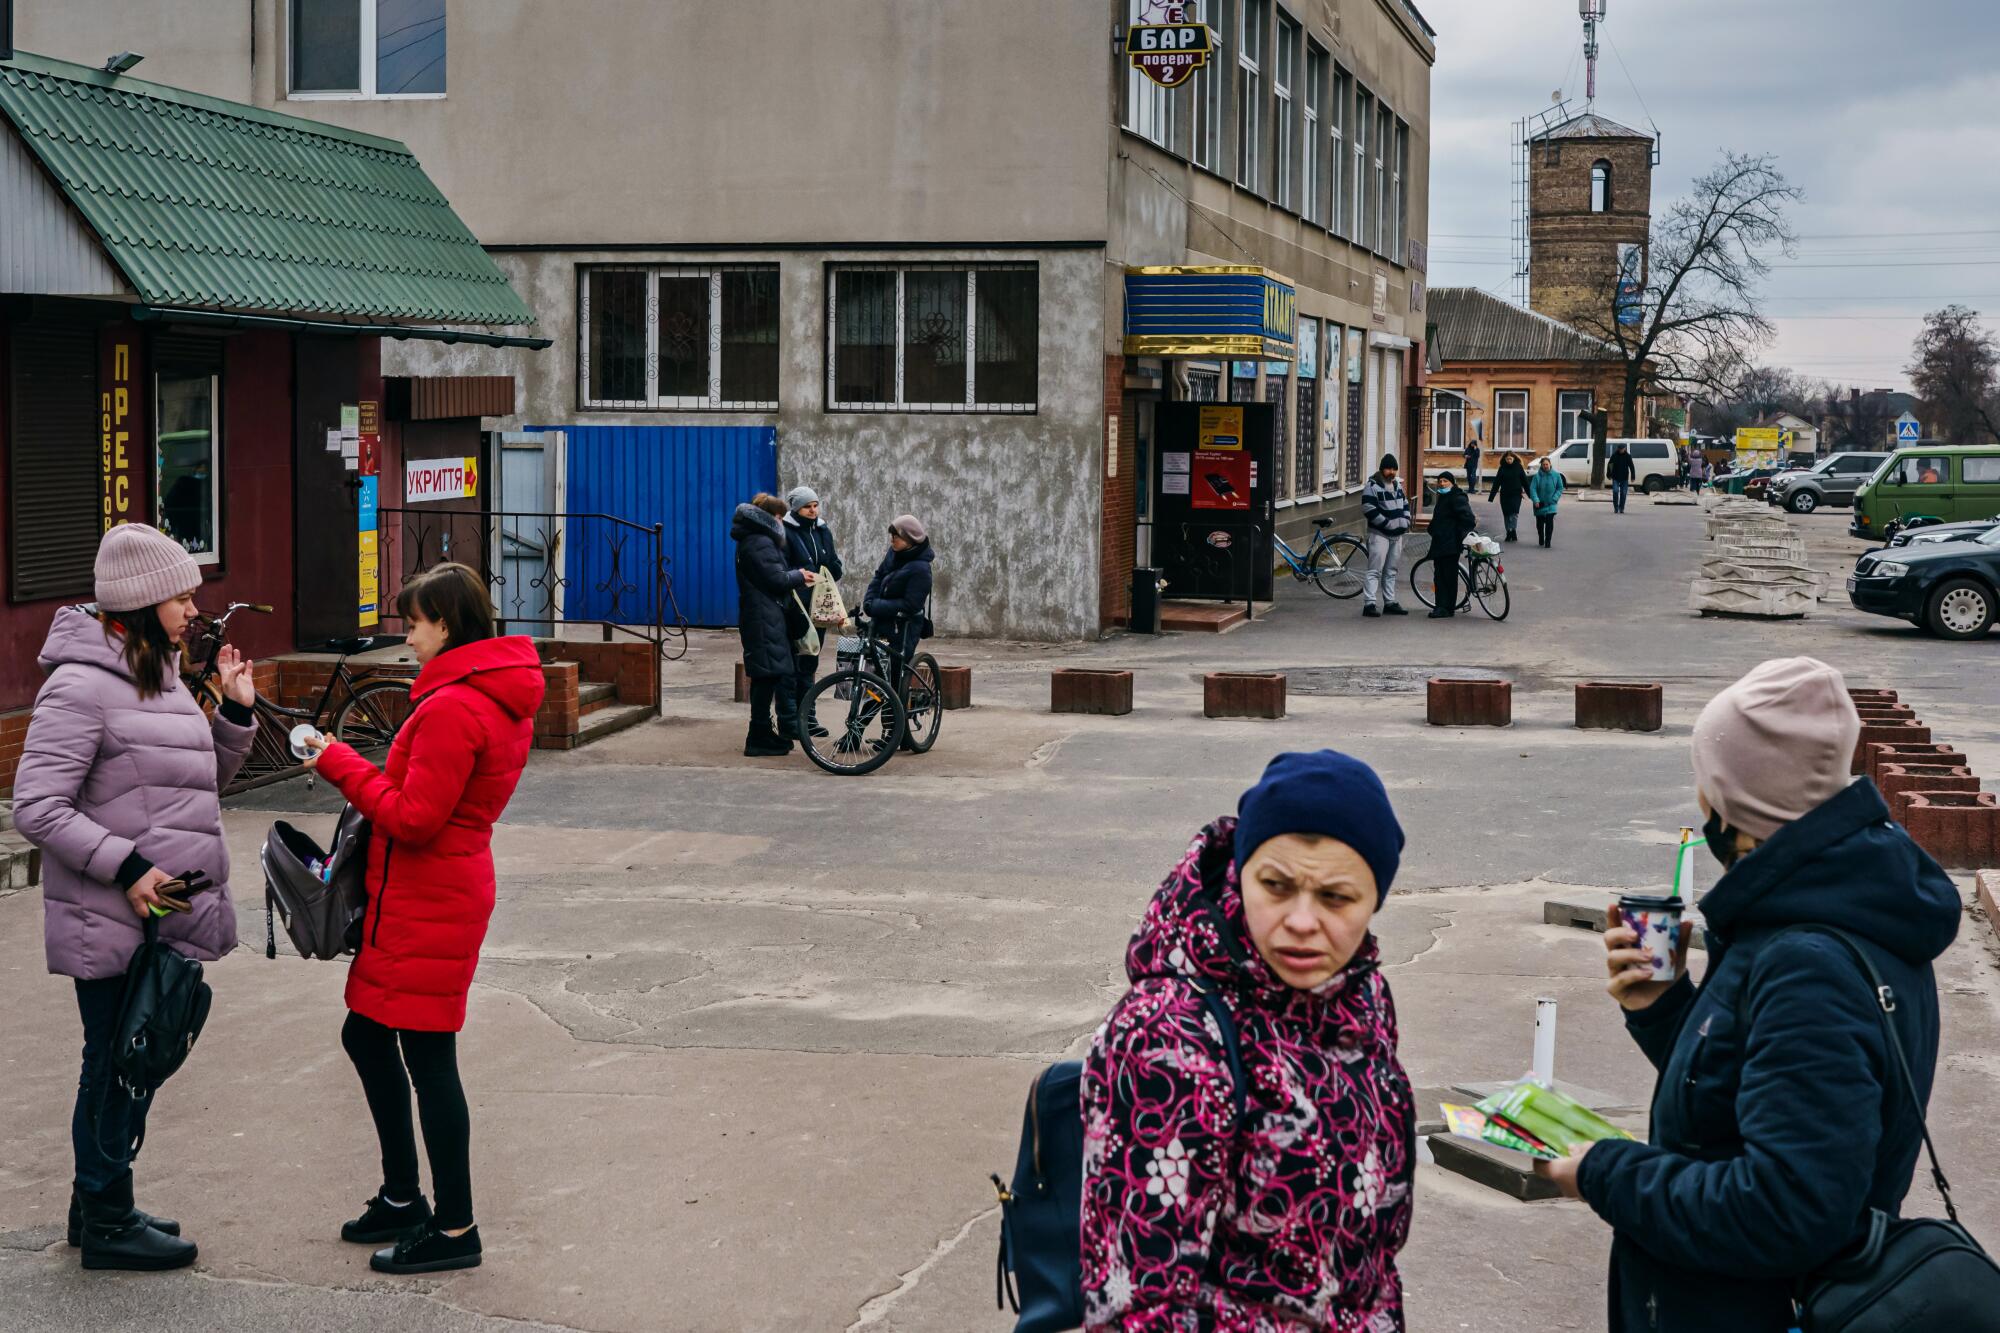 Local residents get supplies and wait for food distribution at the center of town in Oster, Ukraine